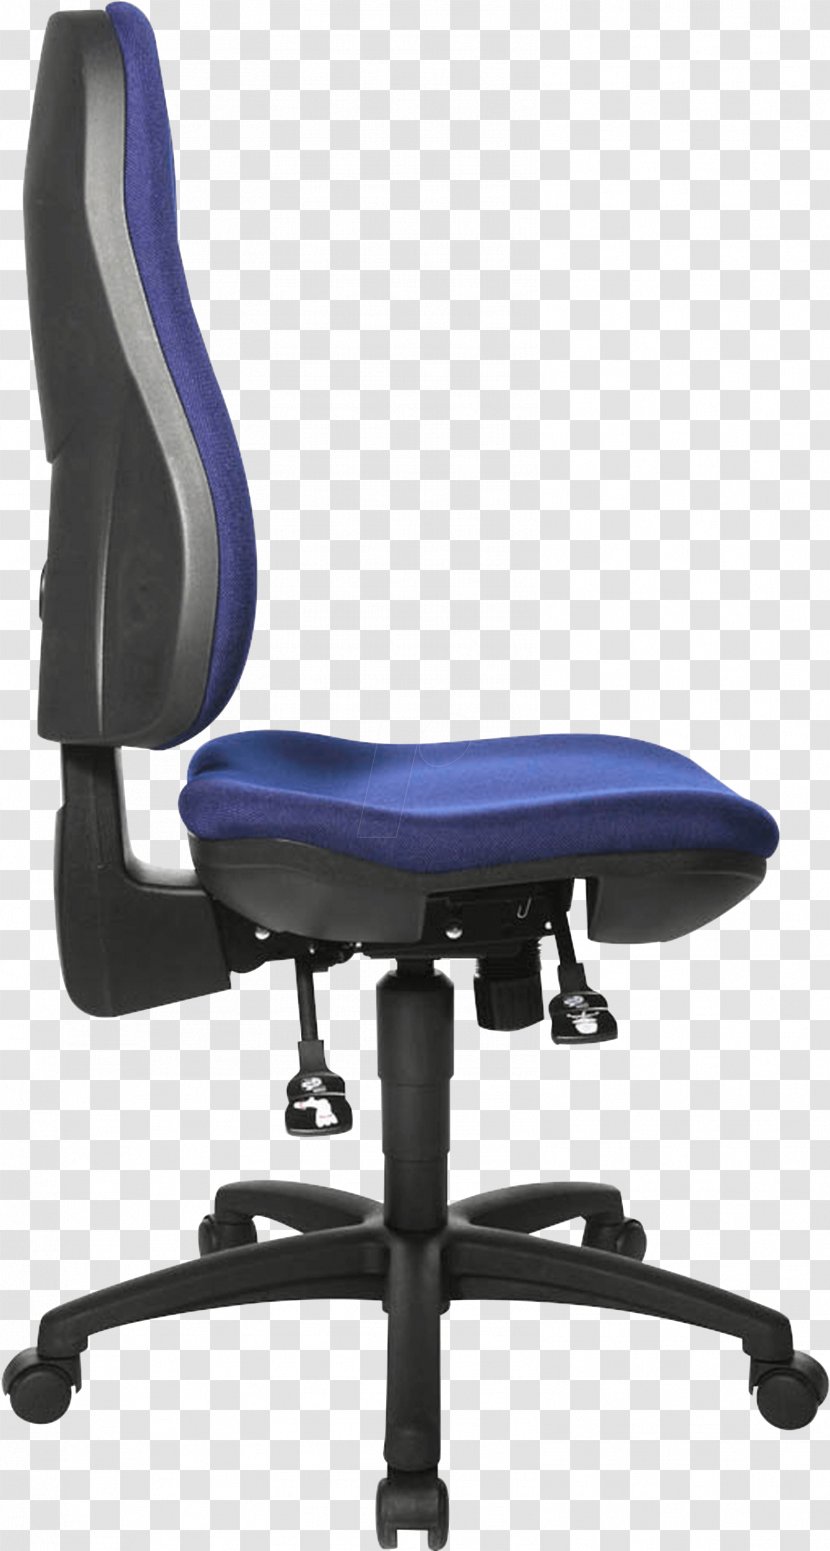 Table Office & Desk Chairs Swivel Chair Computer - Aeron Transparent PNG